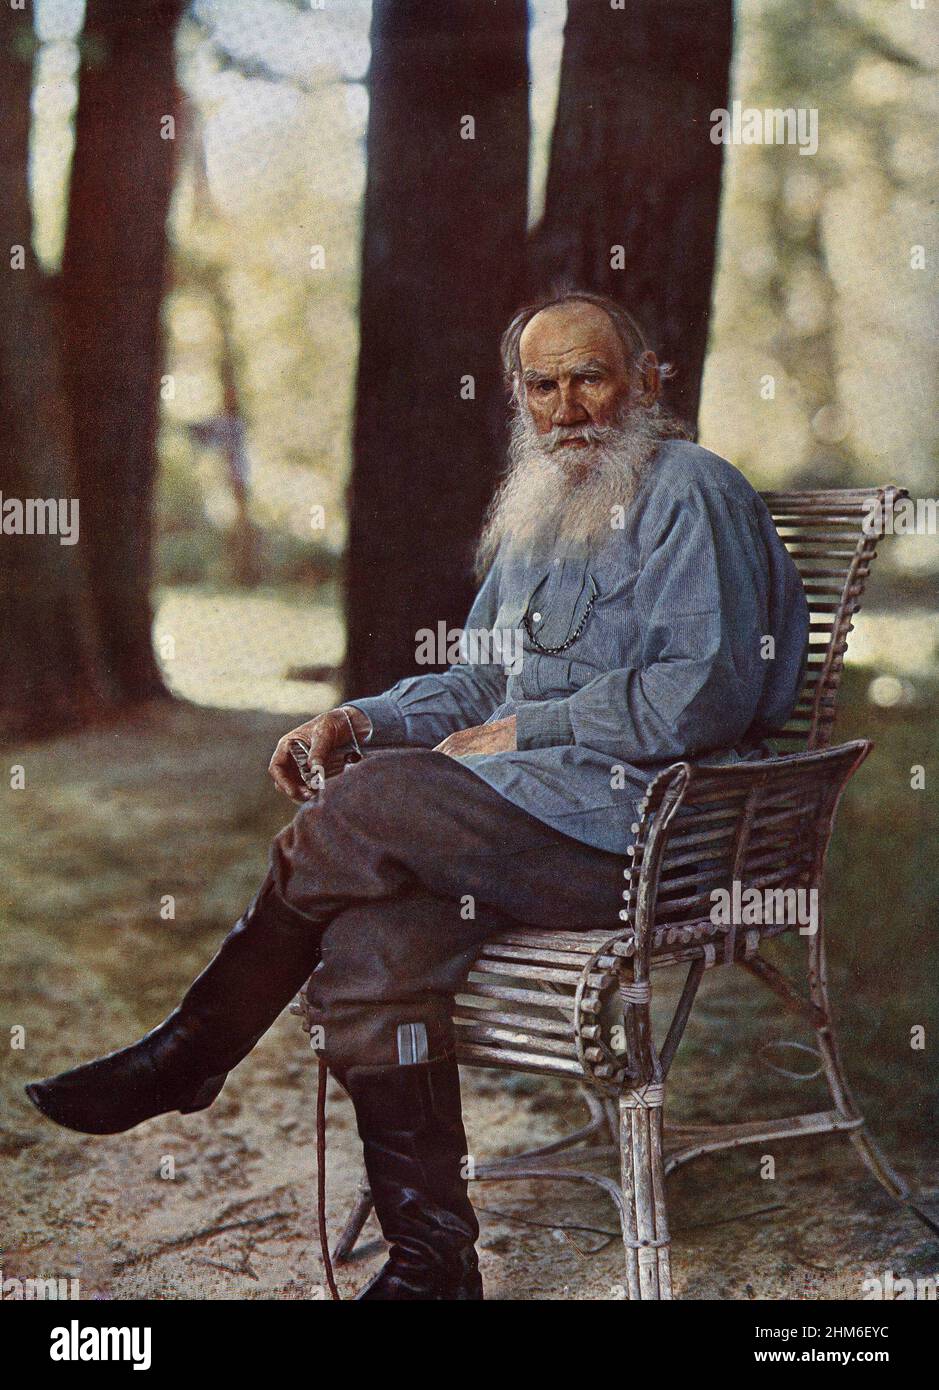 A colour portrait of Leo Tolstay,author of War & Peace and Anna Karenina, from 1908 when he was 80 years old.  The photo was takenat his family estate and birthplace Yasnaya Polyana. Stock Photo